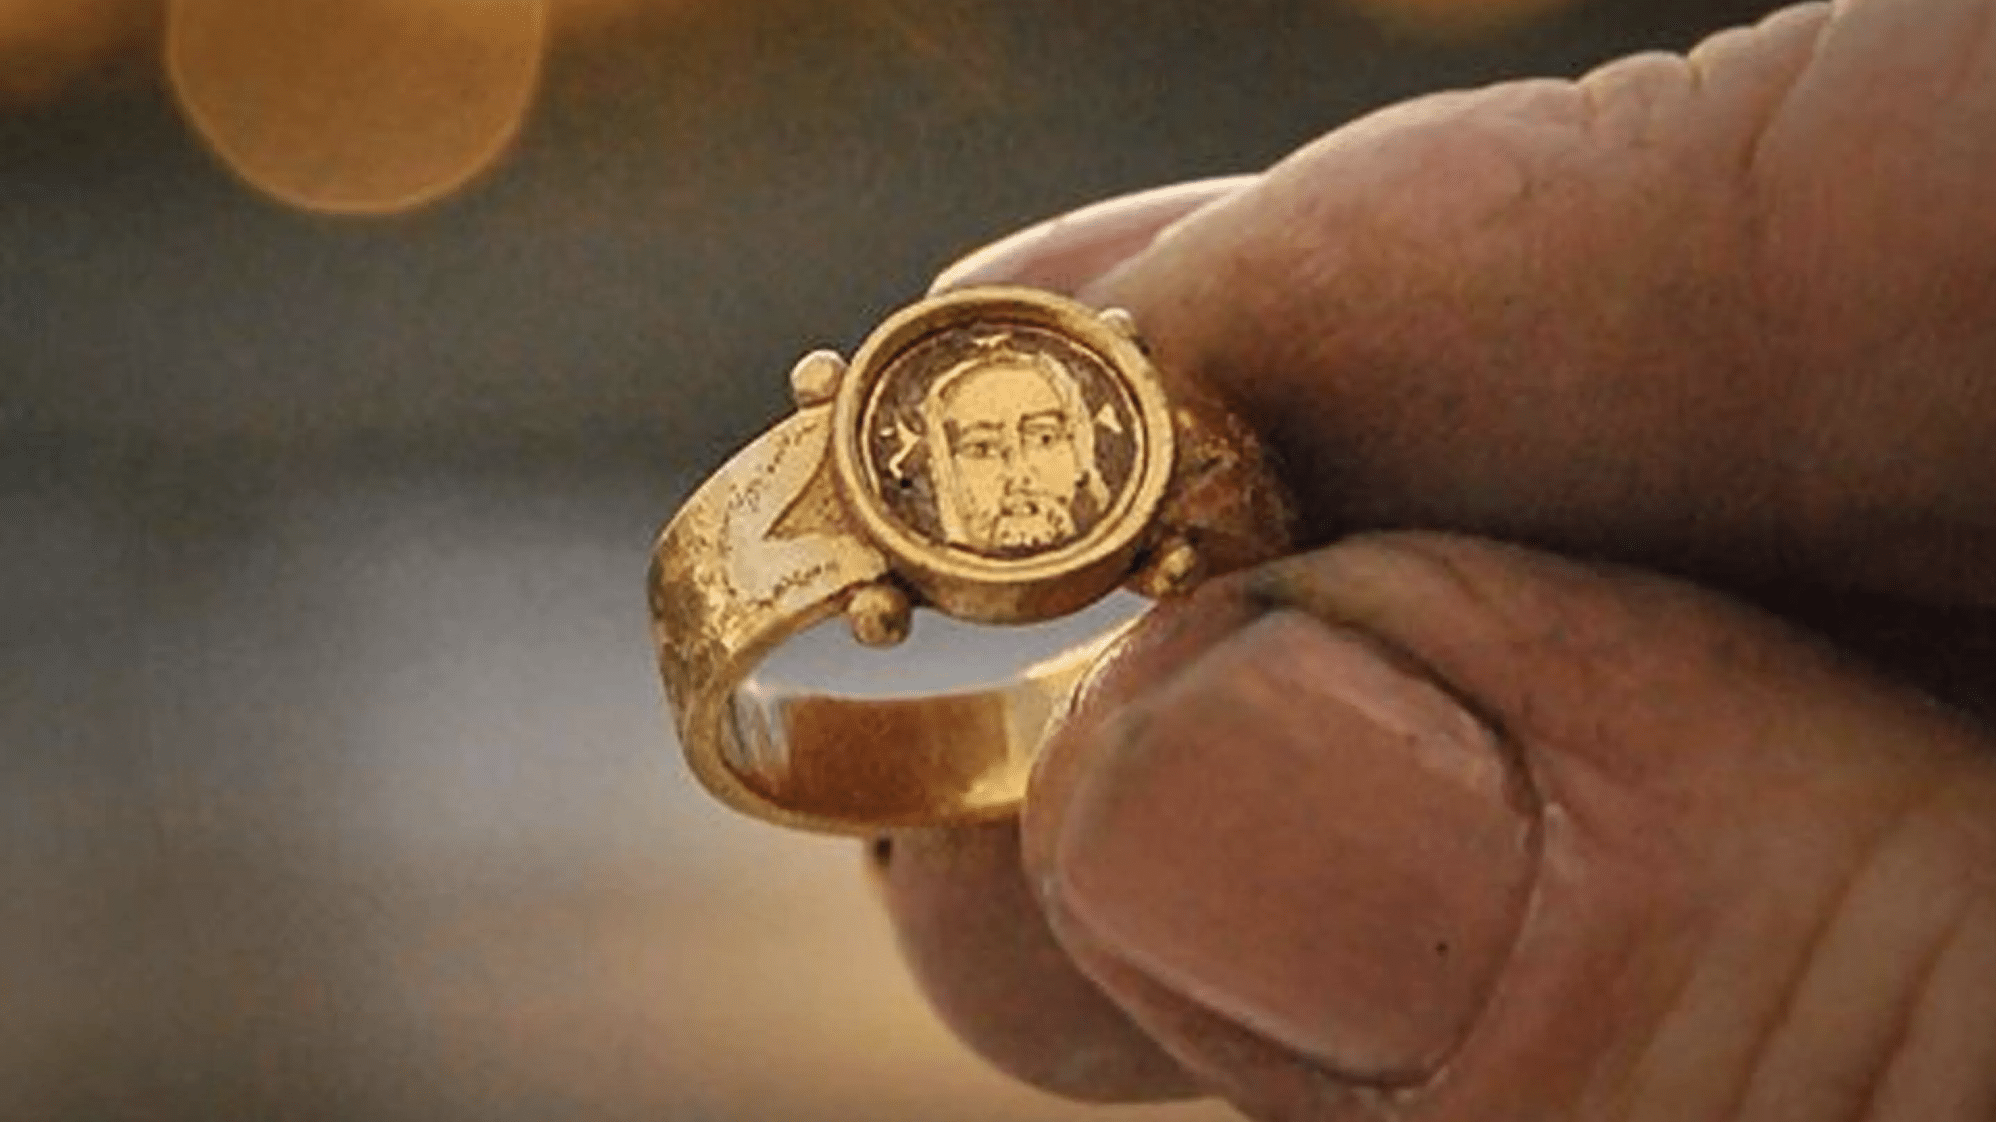 Archeologists discover ancient gold ring allegedly showing the face of Christ